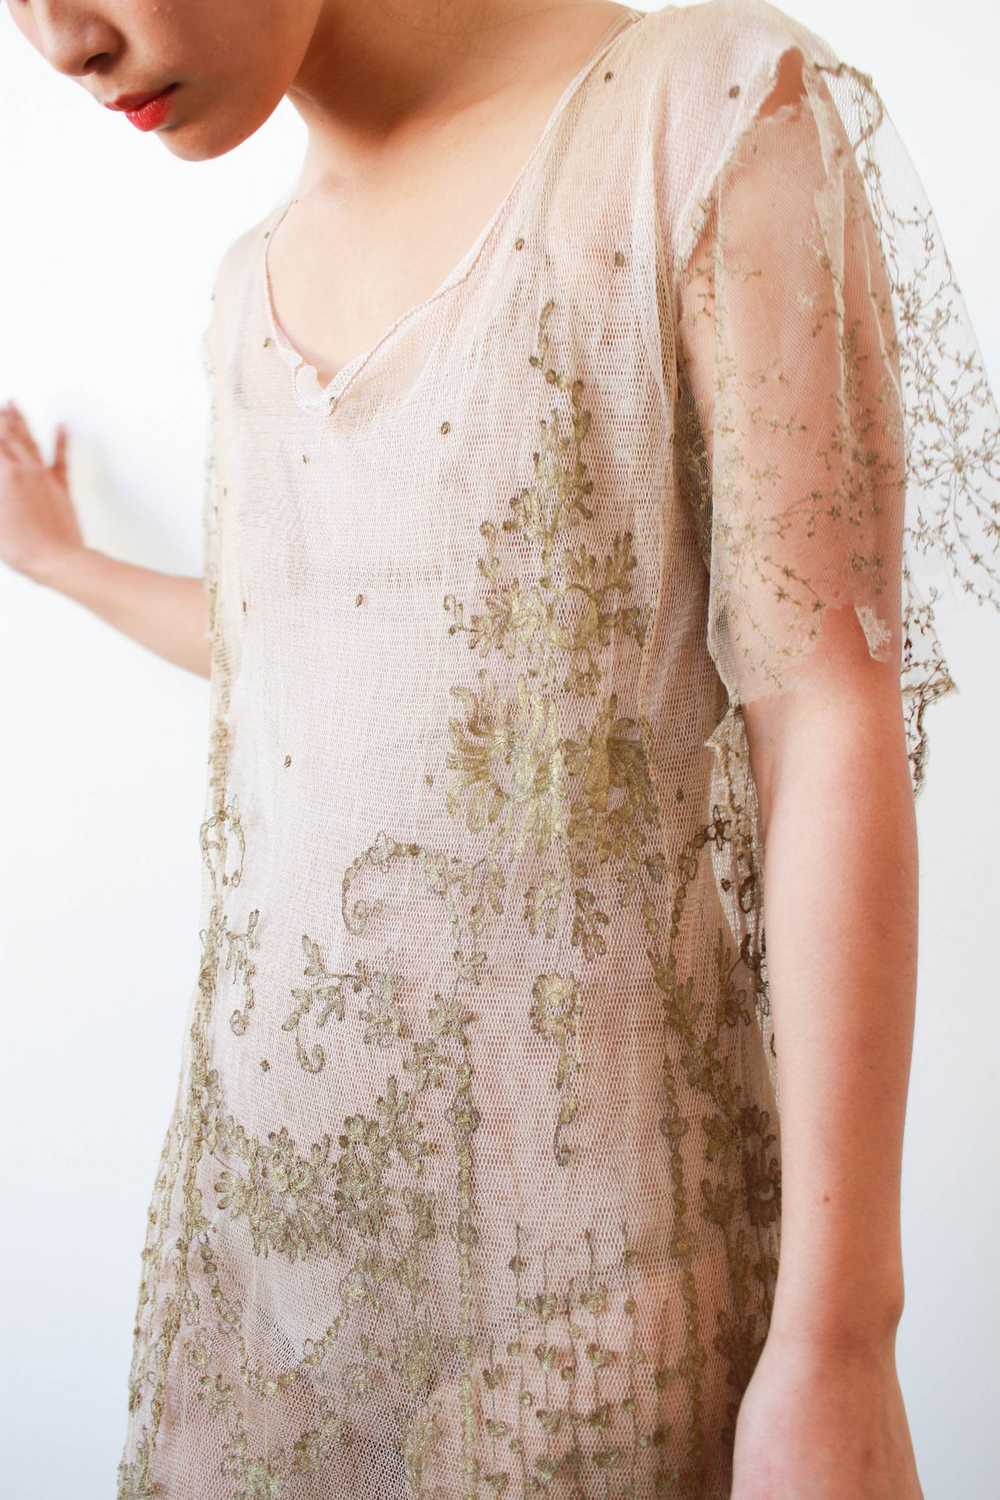 1920s Sheer Layered Net Lace Nude Dress - image 12